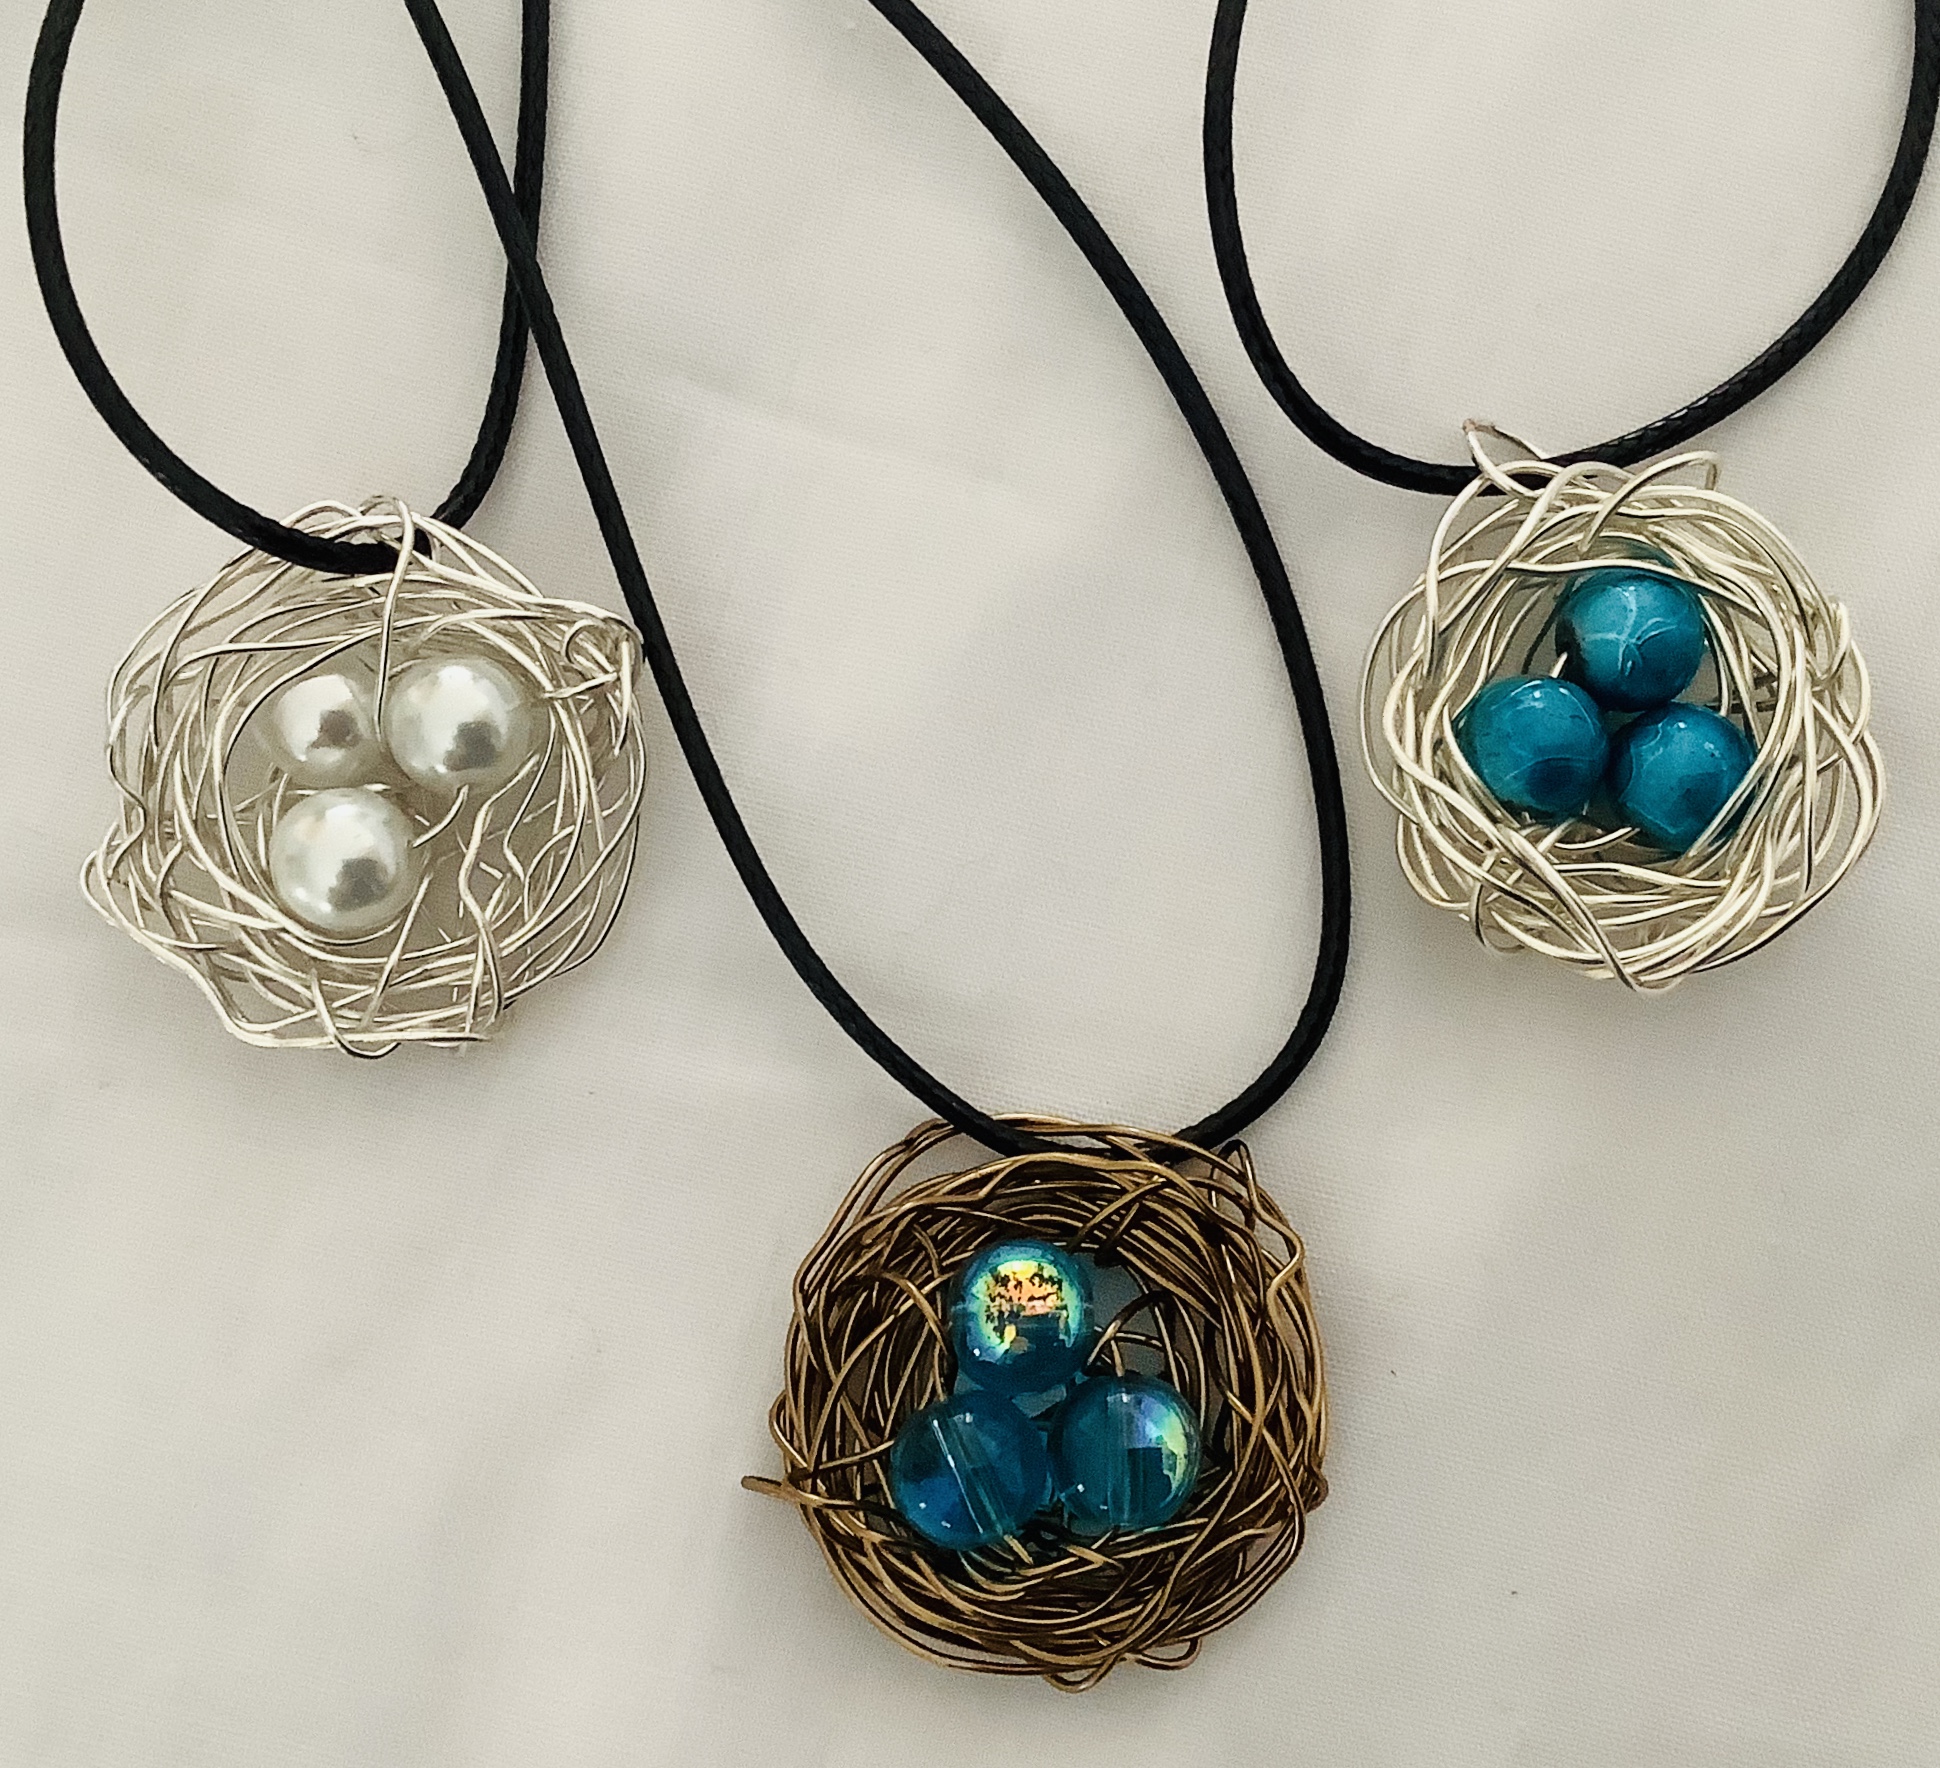 Bird Nest pendants are handwired individually using several types of wire and blue or white bead for the eggs. Any number of eggs can be added to the nest. Some folks have ordered the number of eggs of their family members.   $30.00